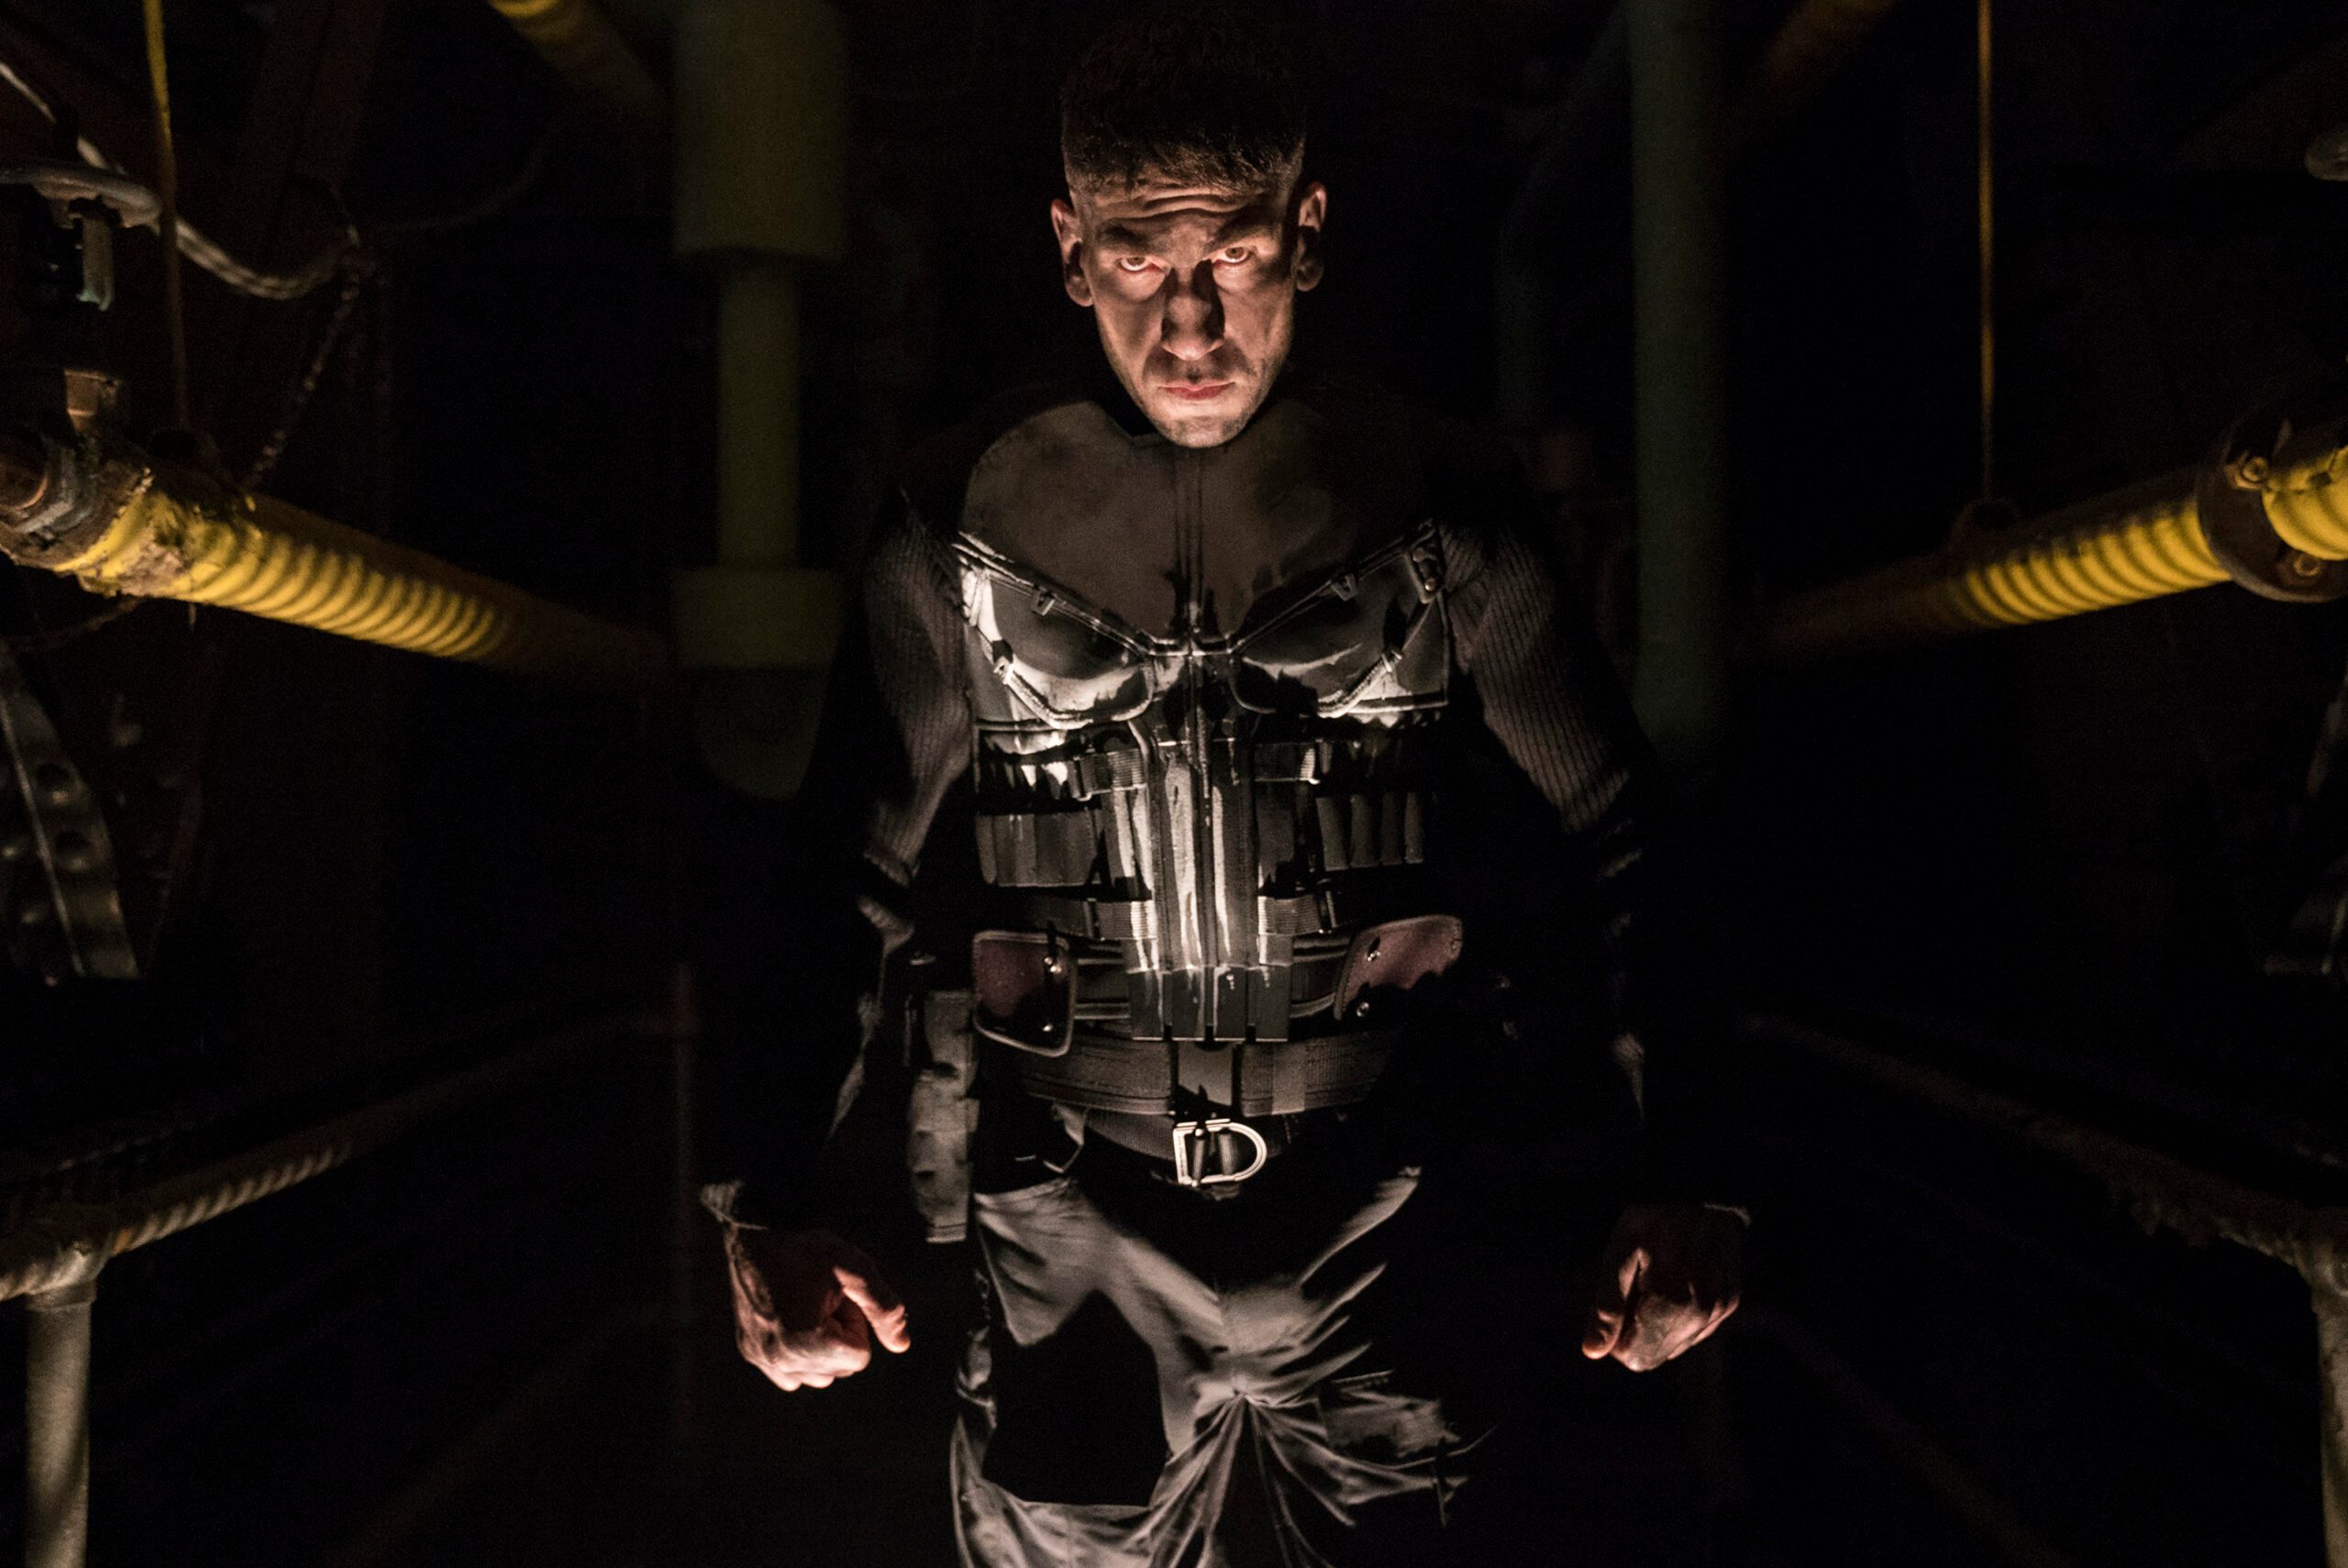 ‘Punisher’ is a shoot-by-numbers revenge fantasy